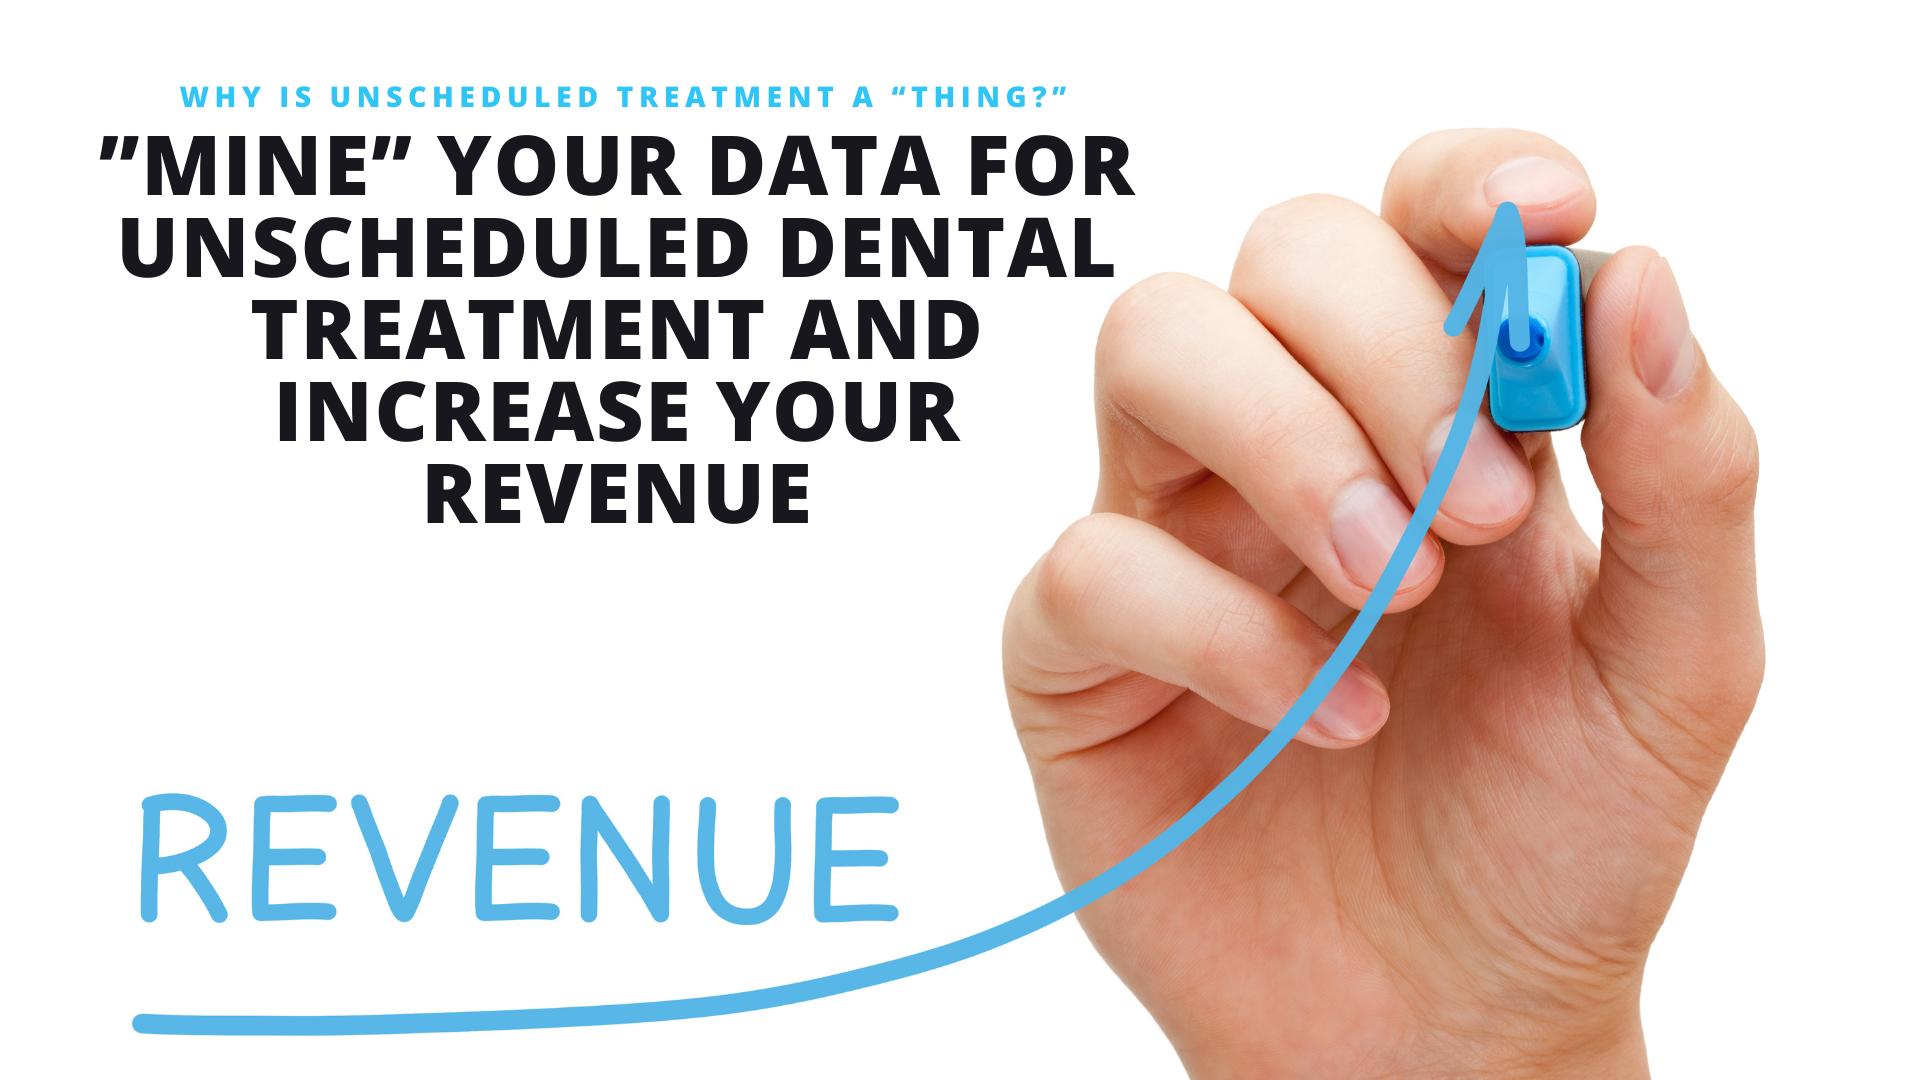 “Mine” Your Data for Unscheduled Dental Treatment and Increase Your Revenue